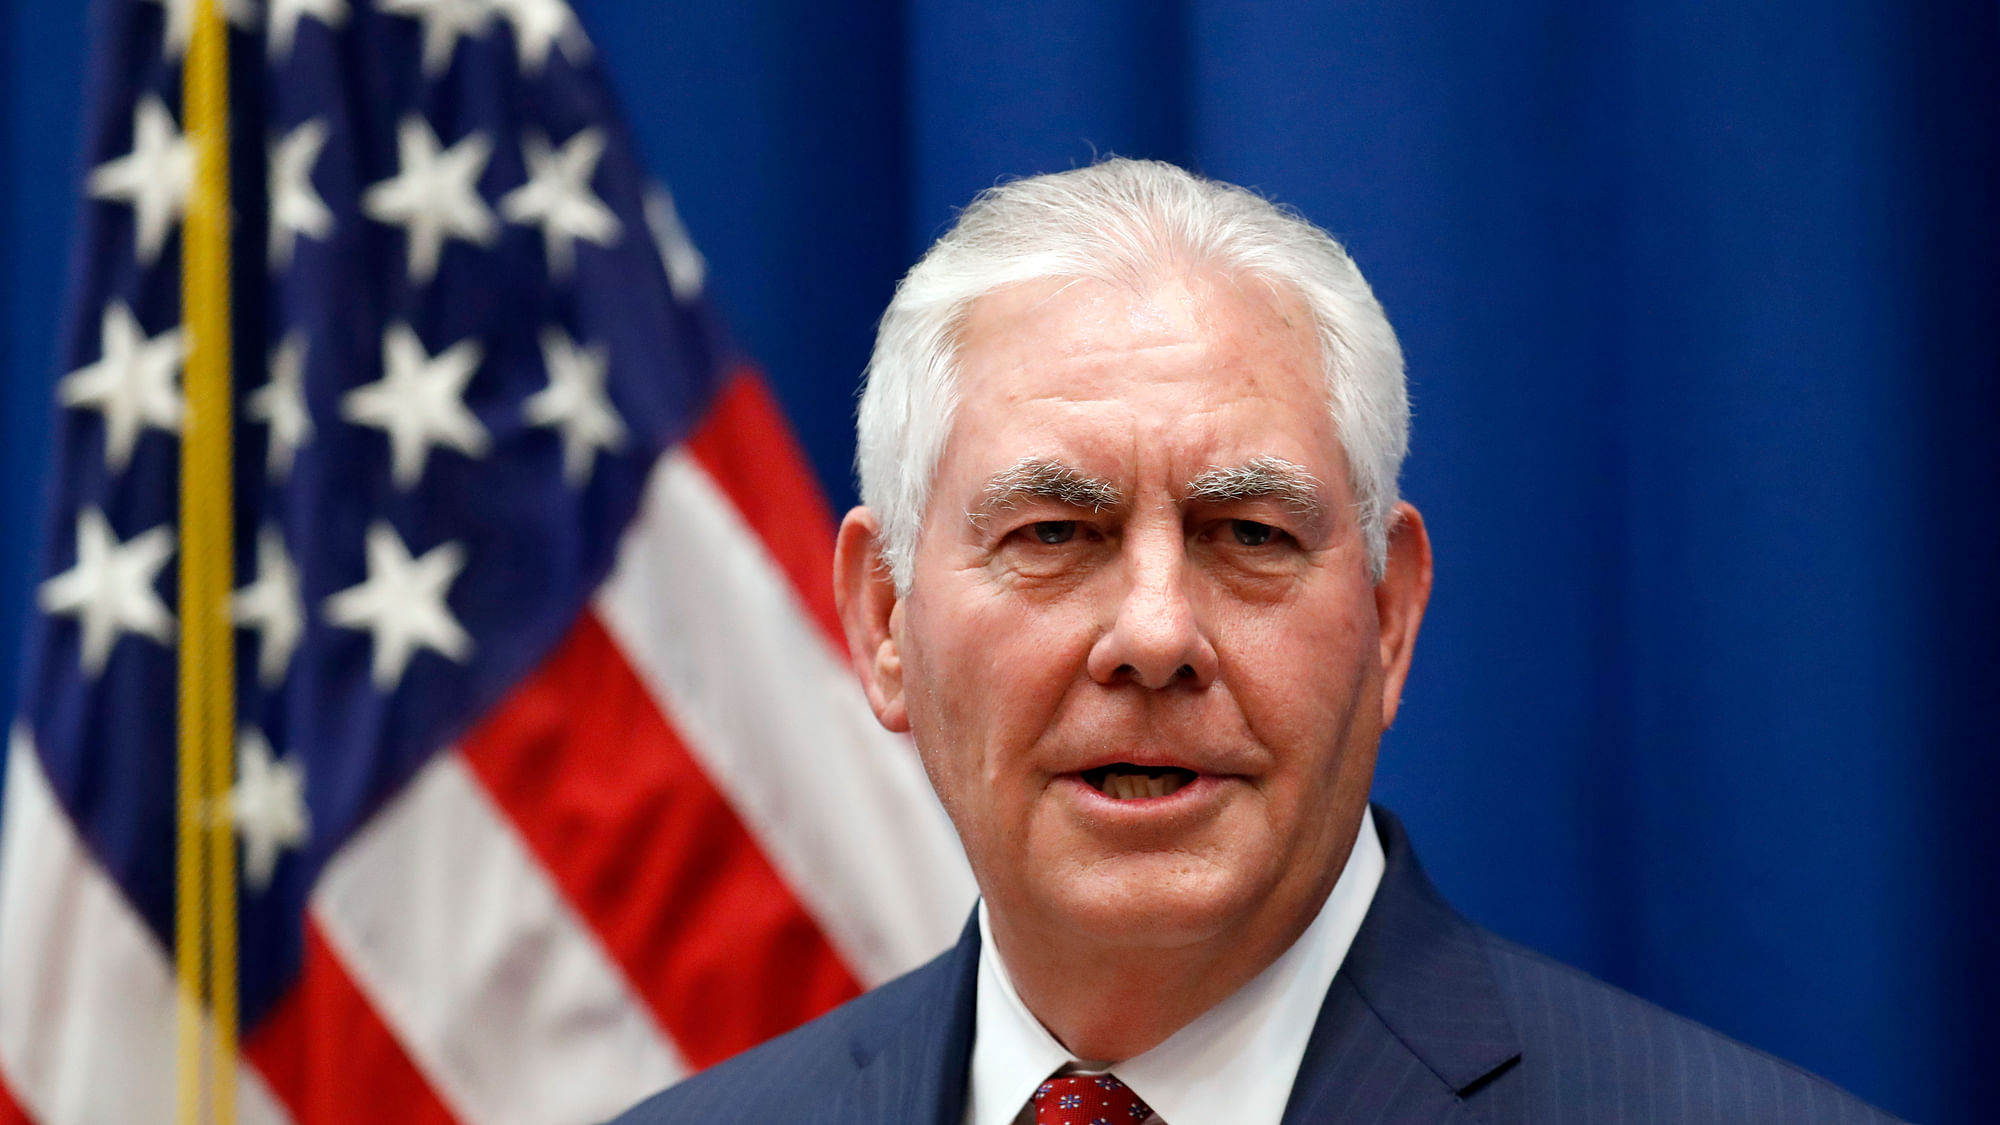 Trump responded in a tweet, saying that Tillerson is not going anywhere